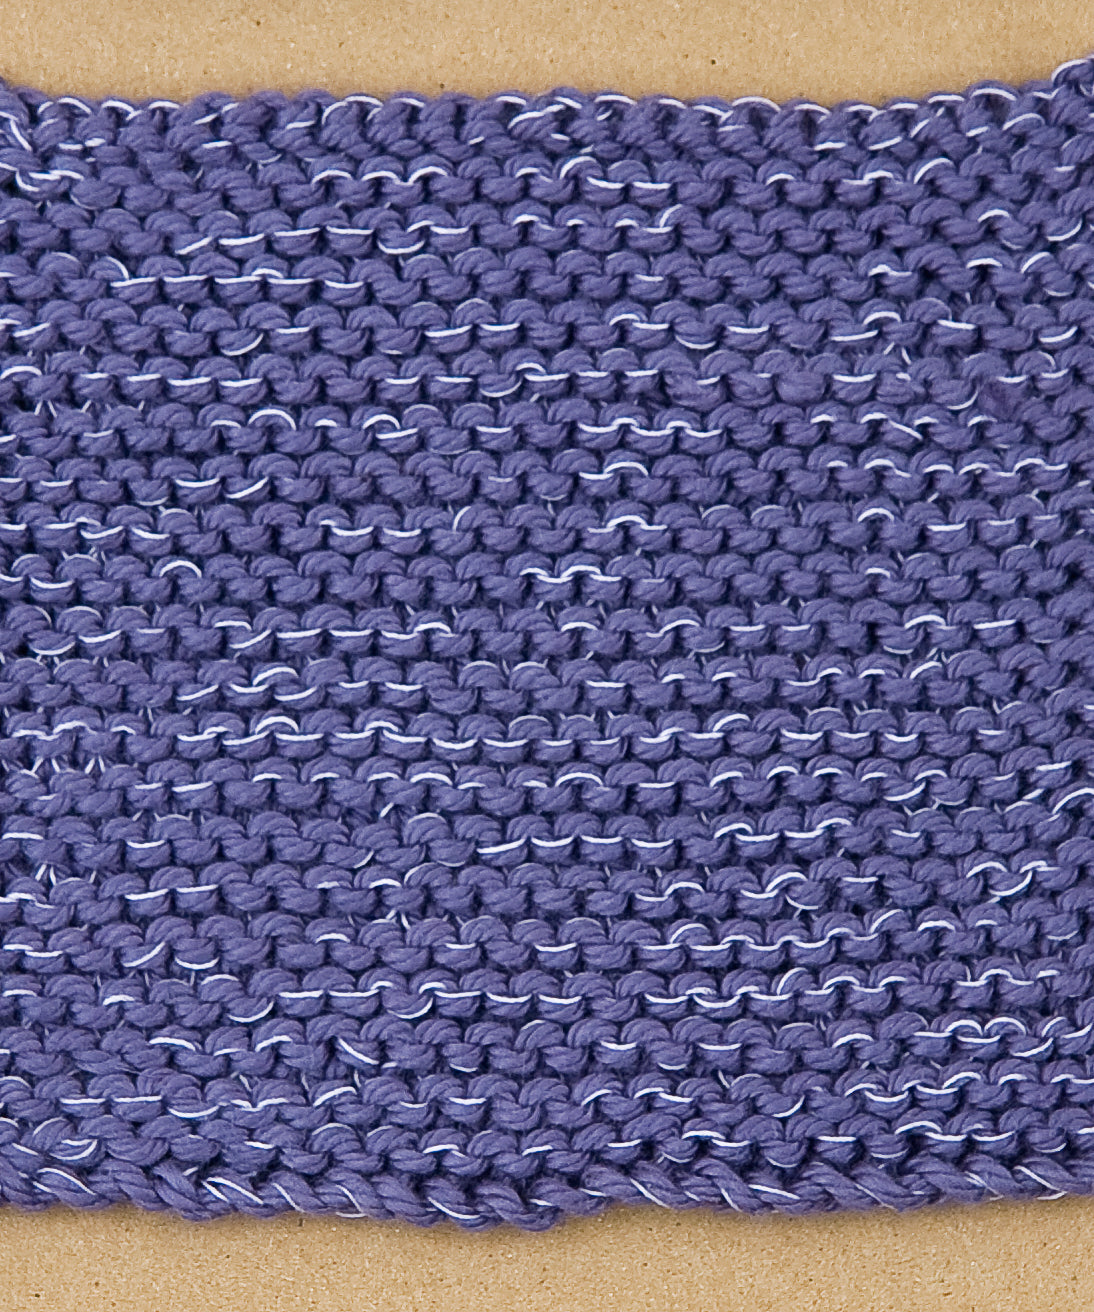 How to knit garter stitch in the round